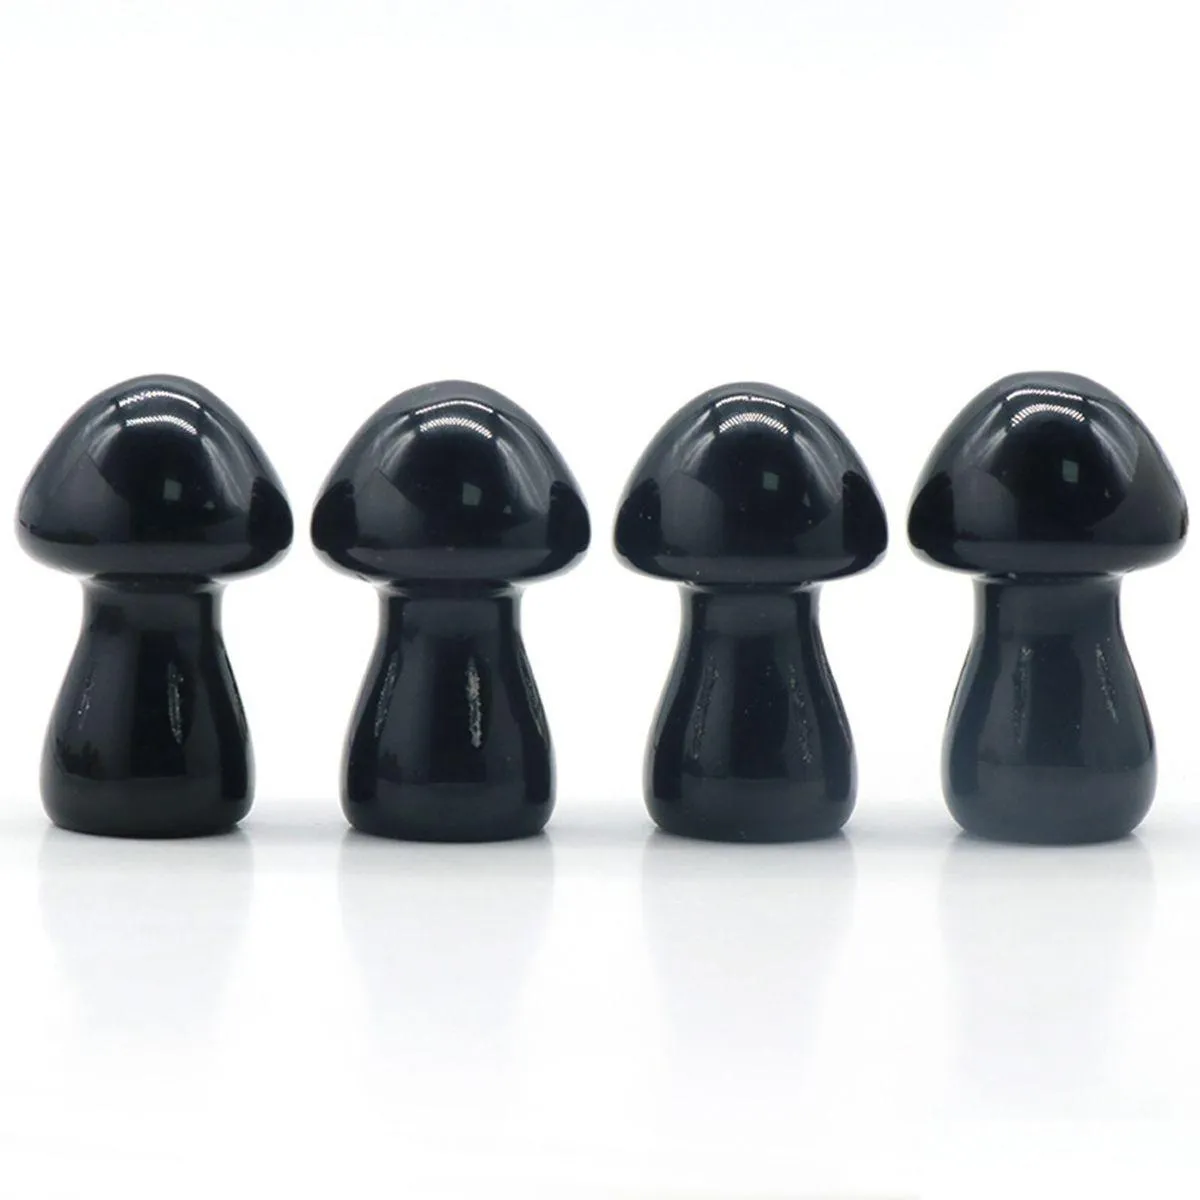 35mm natural hand carving mushroom gemstones and obsidain stones for mushrooms home decorations